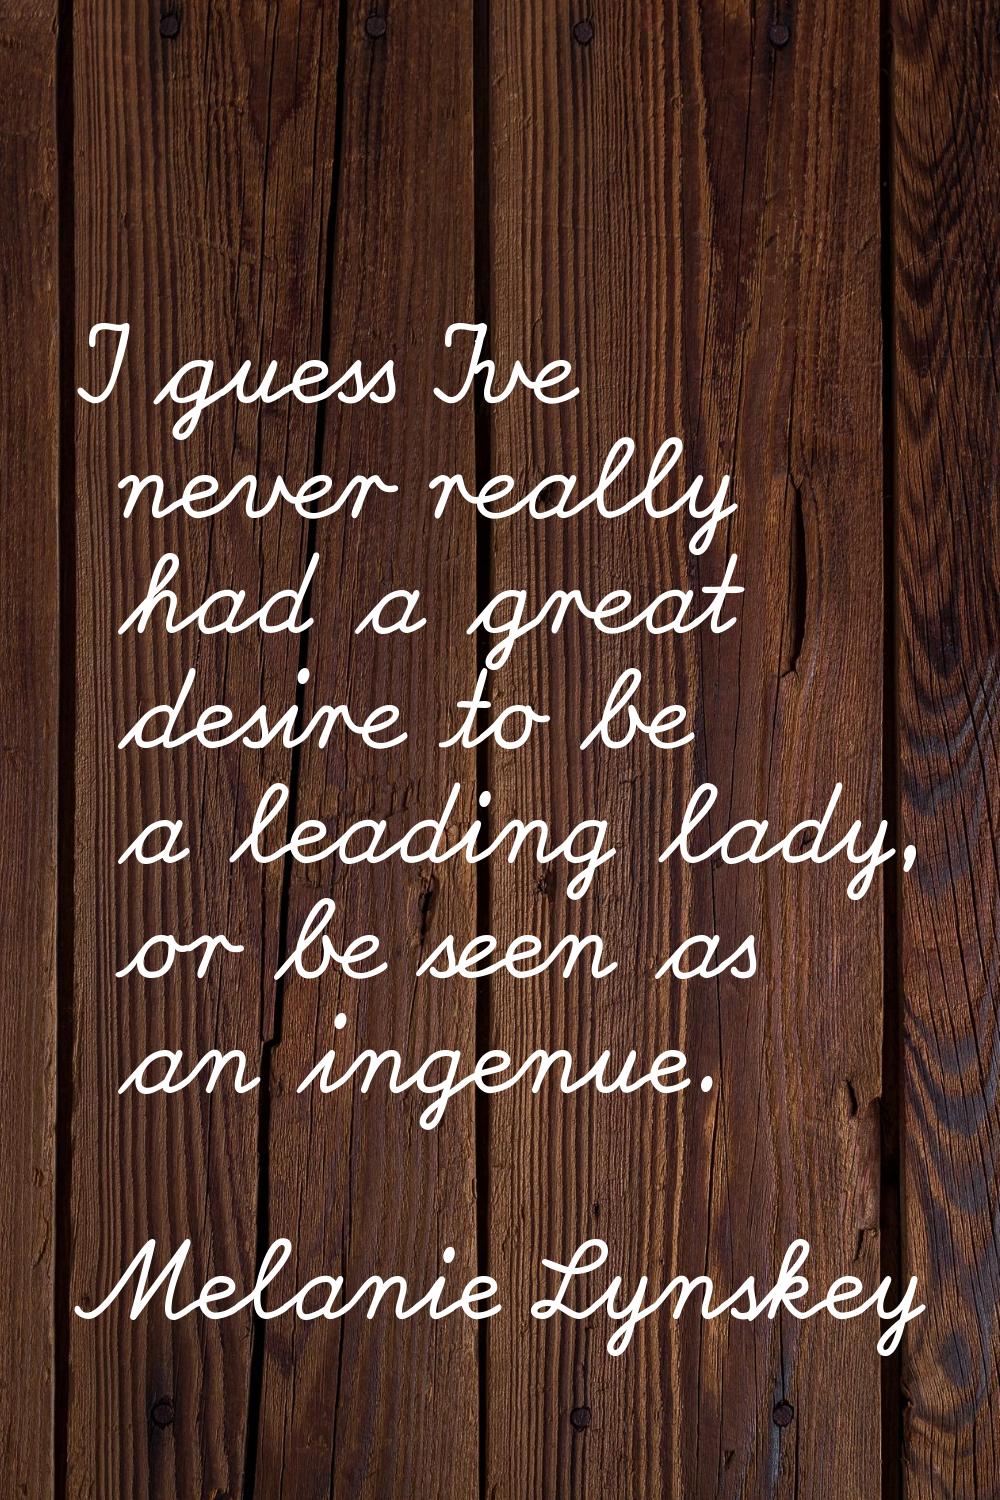 I guess I've never really had a great desire to be a leading lady, or be seen as an ingenue.